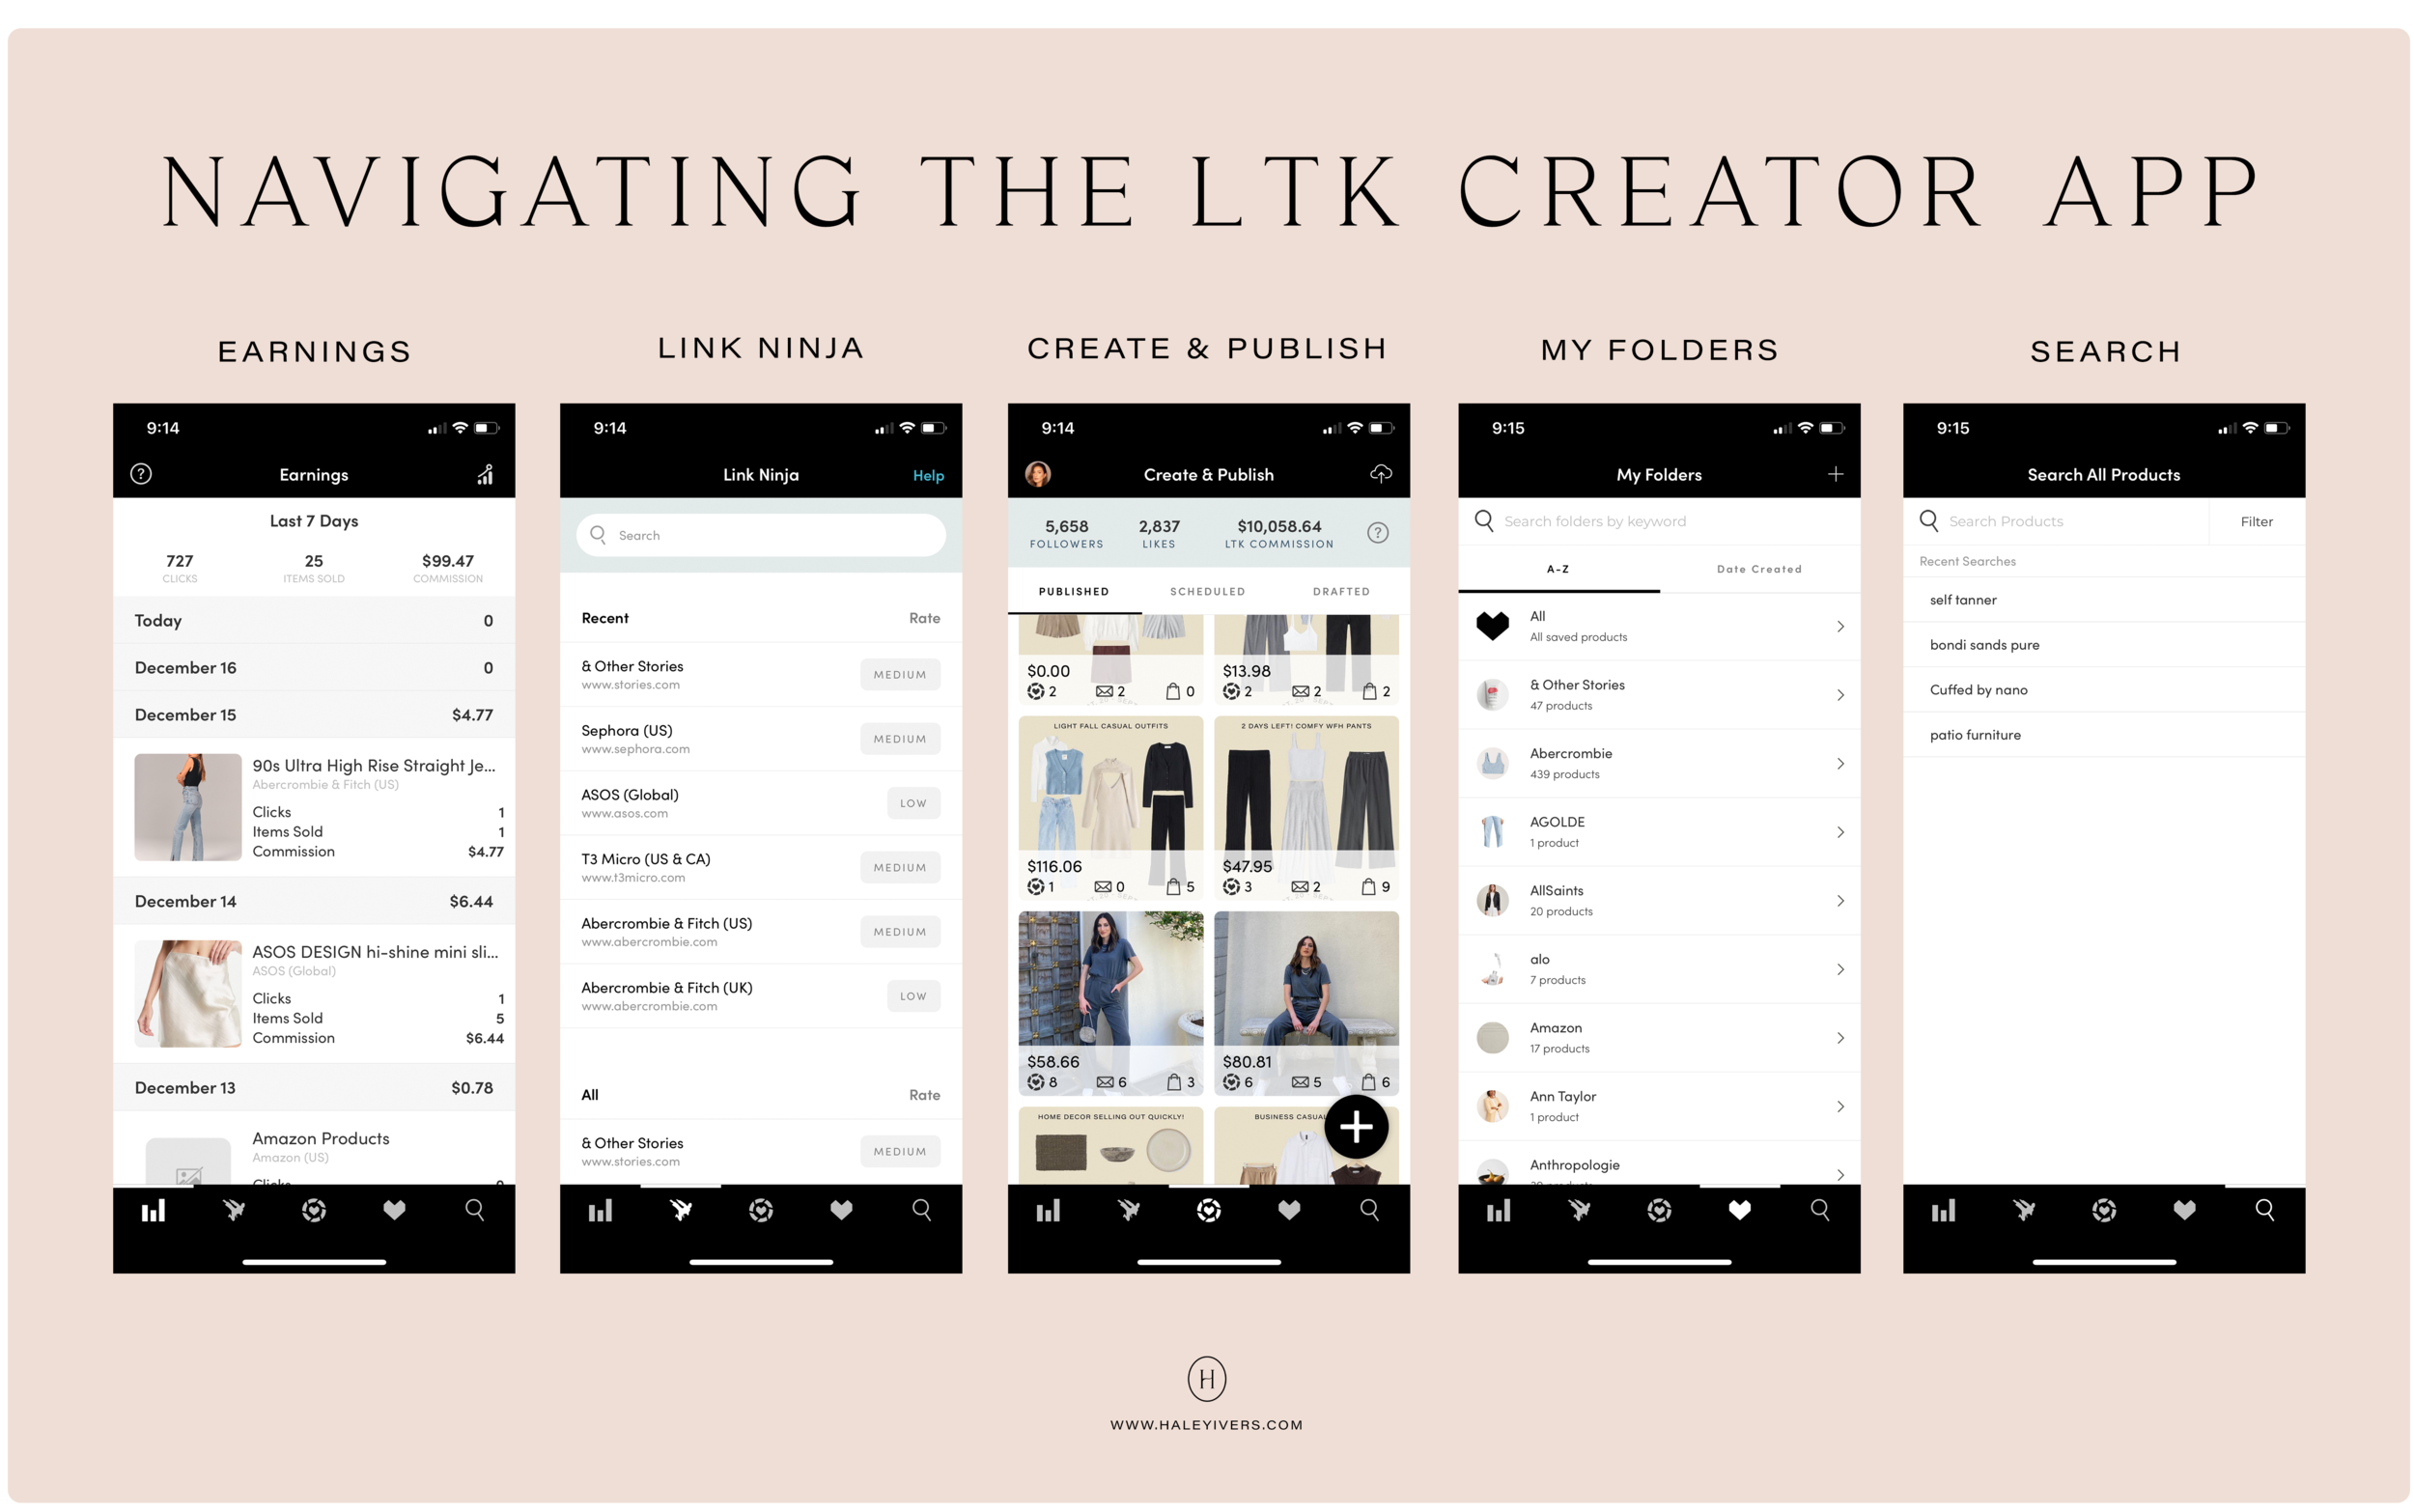 The Ultimate Guide: How to Monetize Your Content with LTK as an